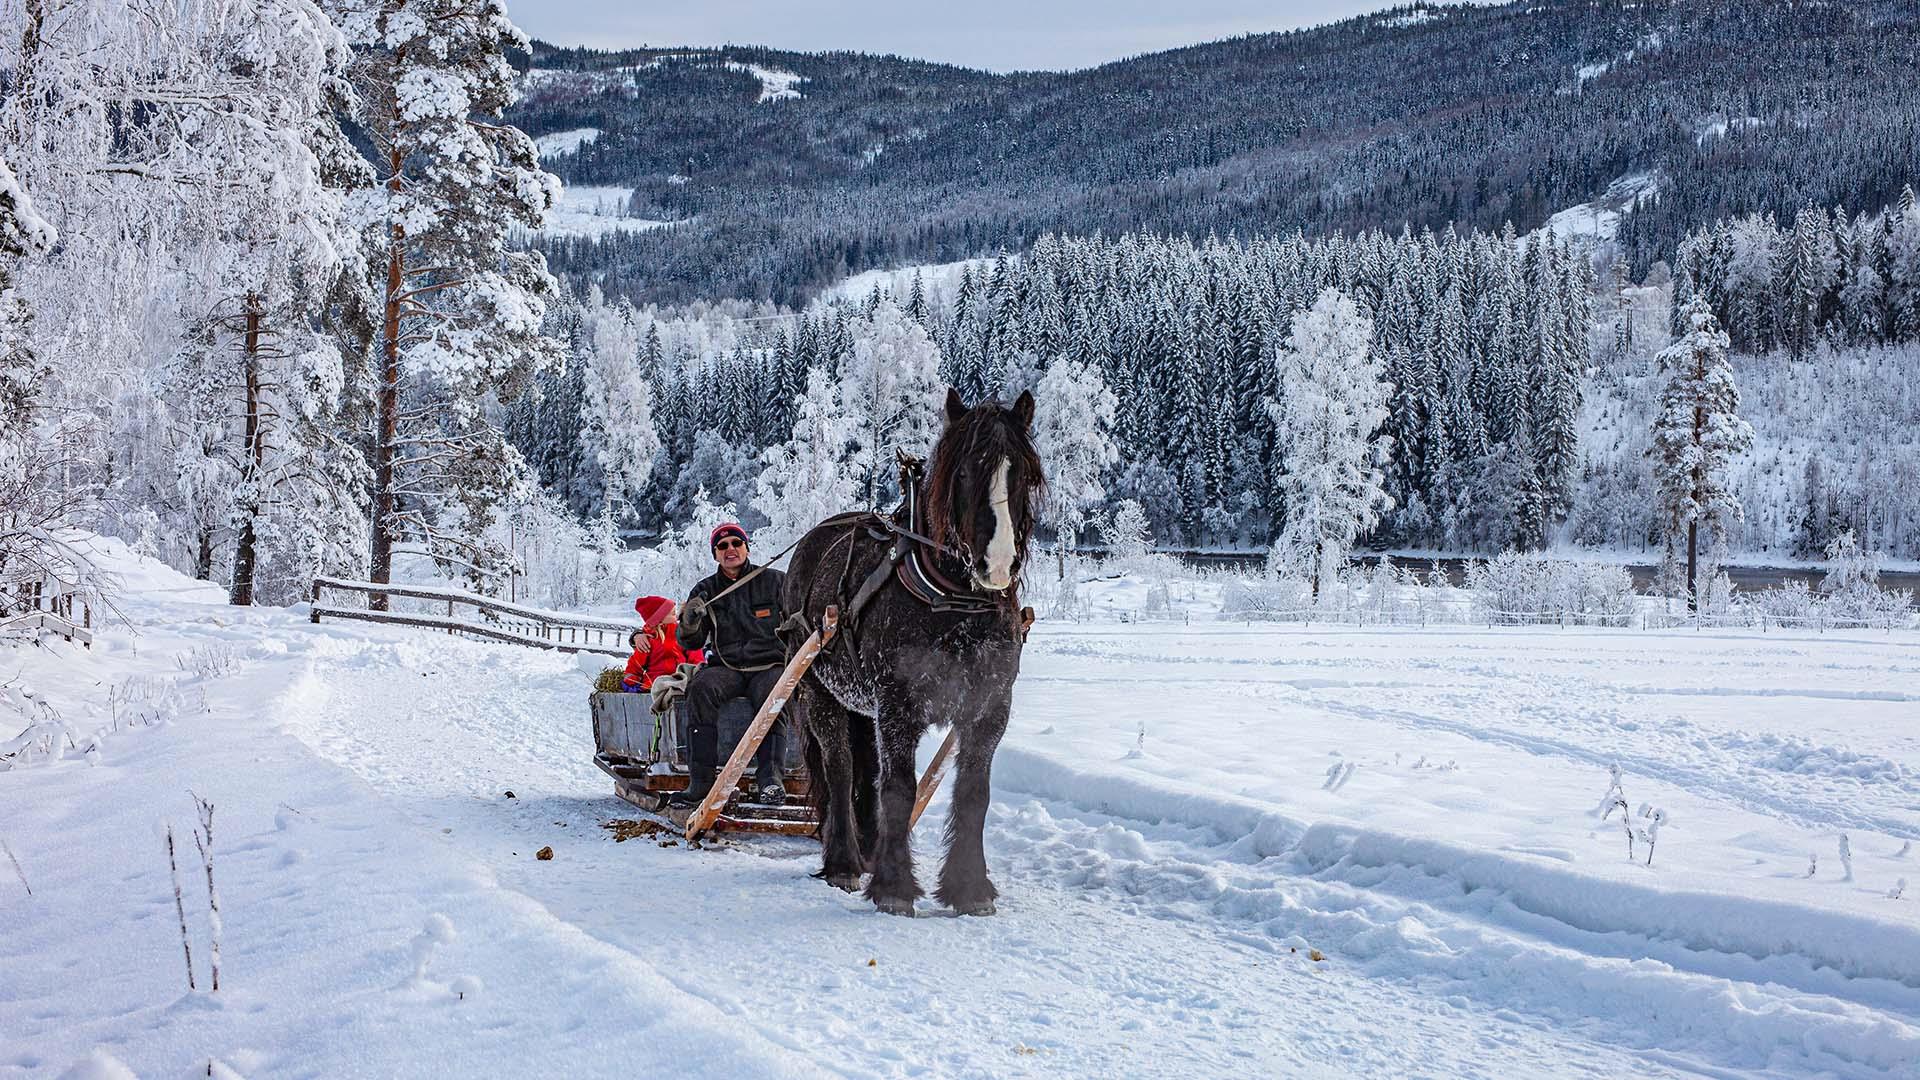 A cold blooded horse pulling a sleigh on a snowy farm road with snow- and rimfrost covered trees in the background.